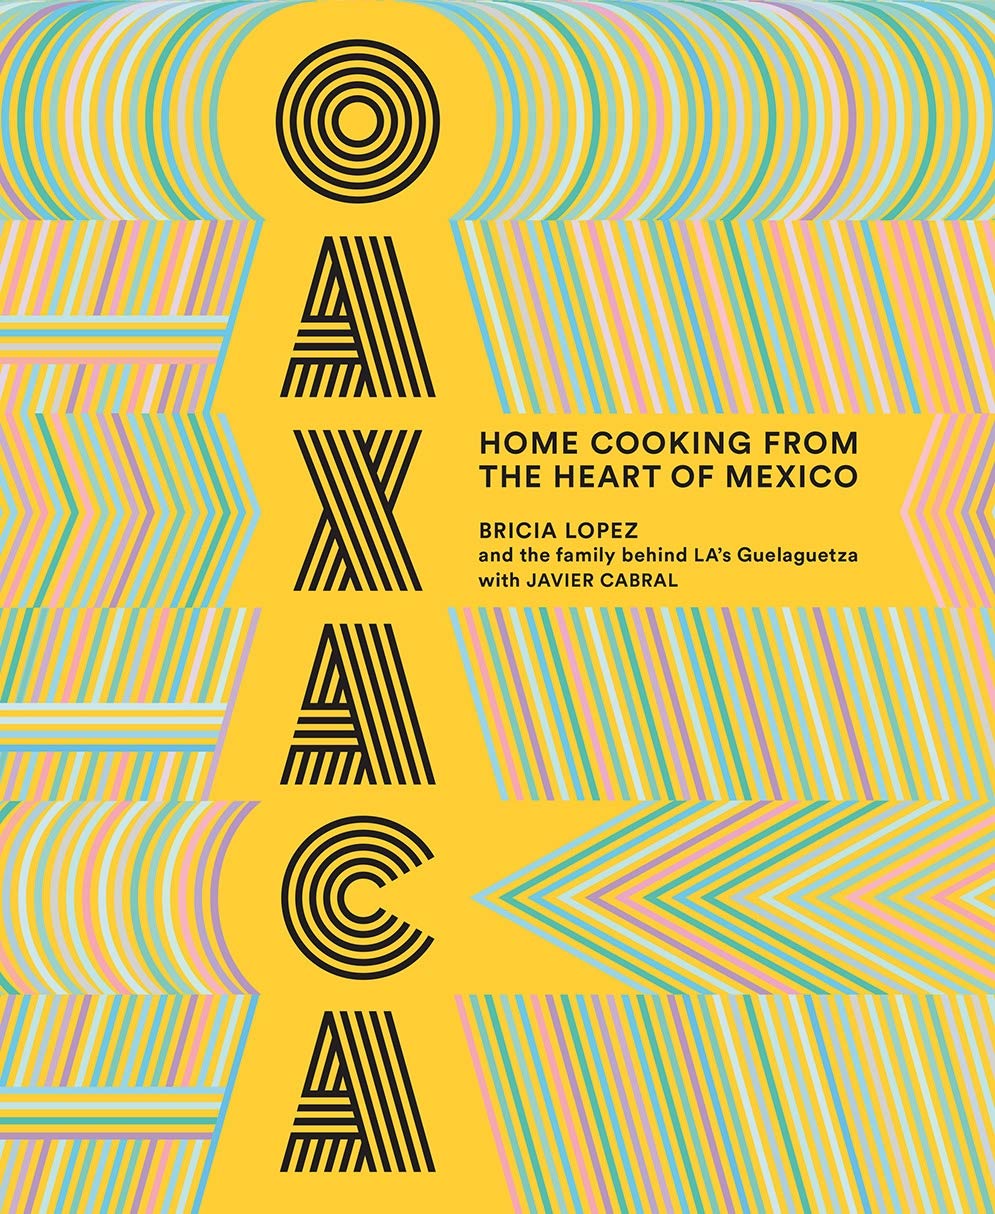 Oaxaca: Home Cooking from the Heart of Mexico by Bricia Lopez